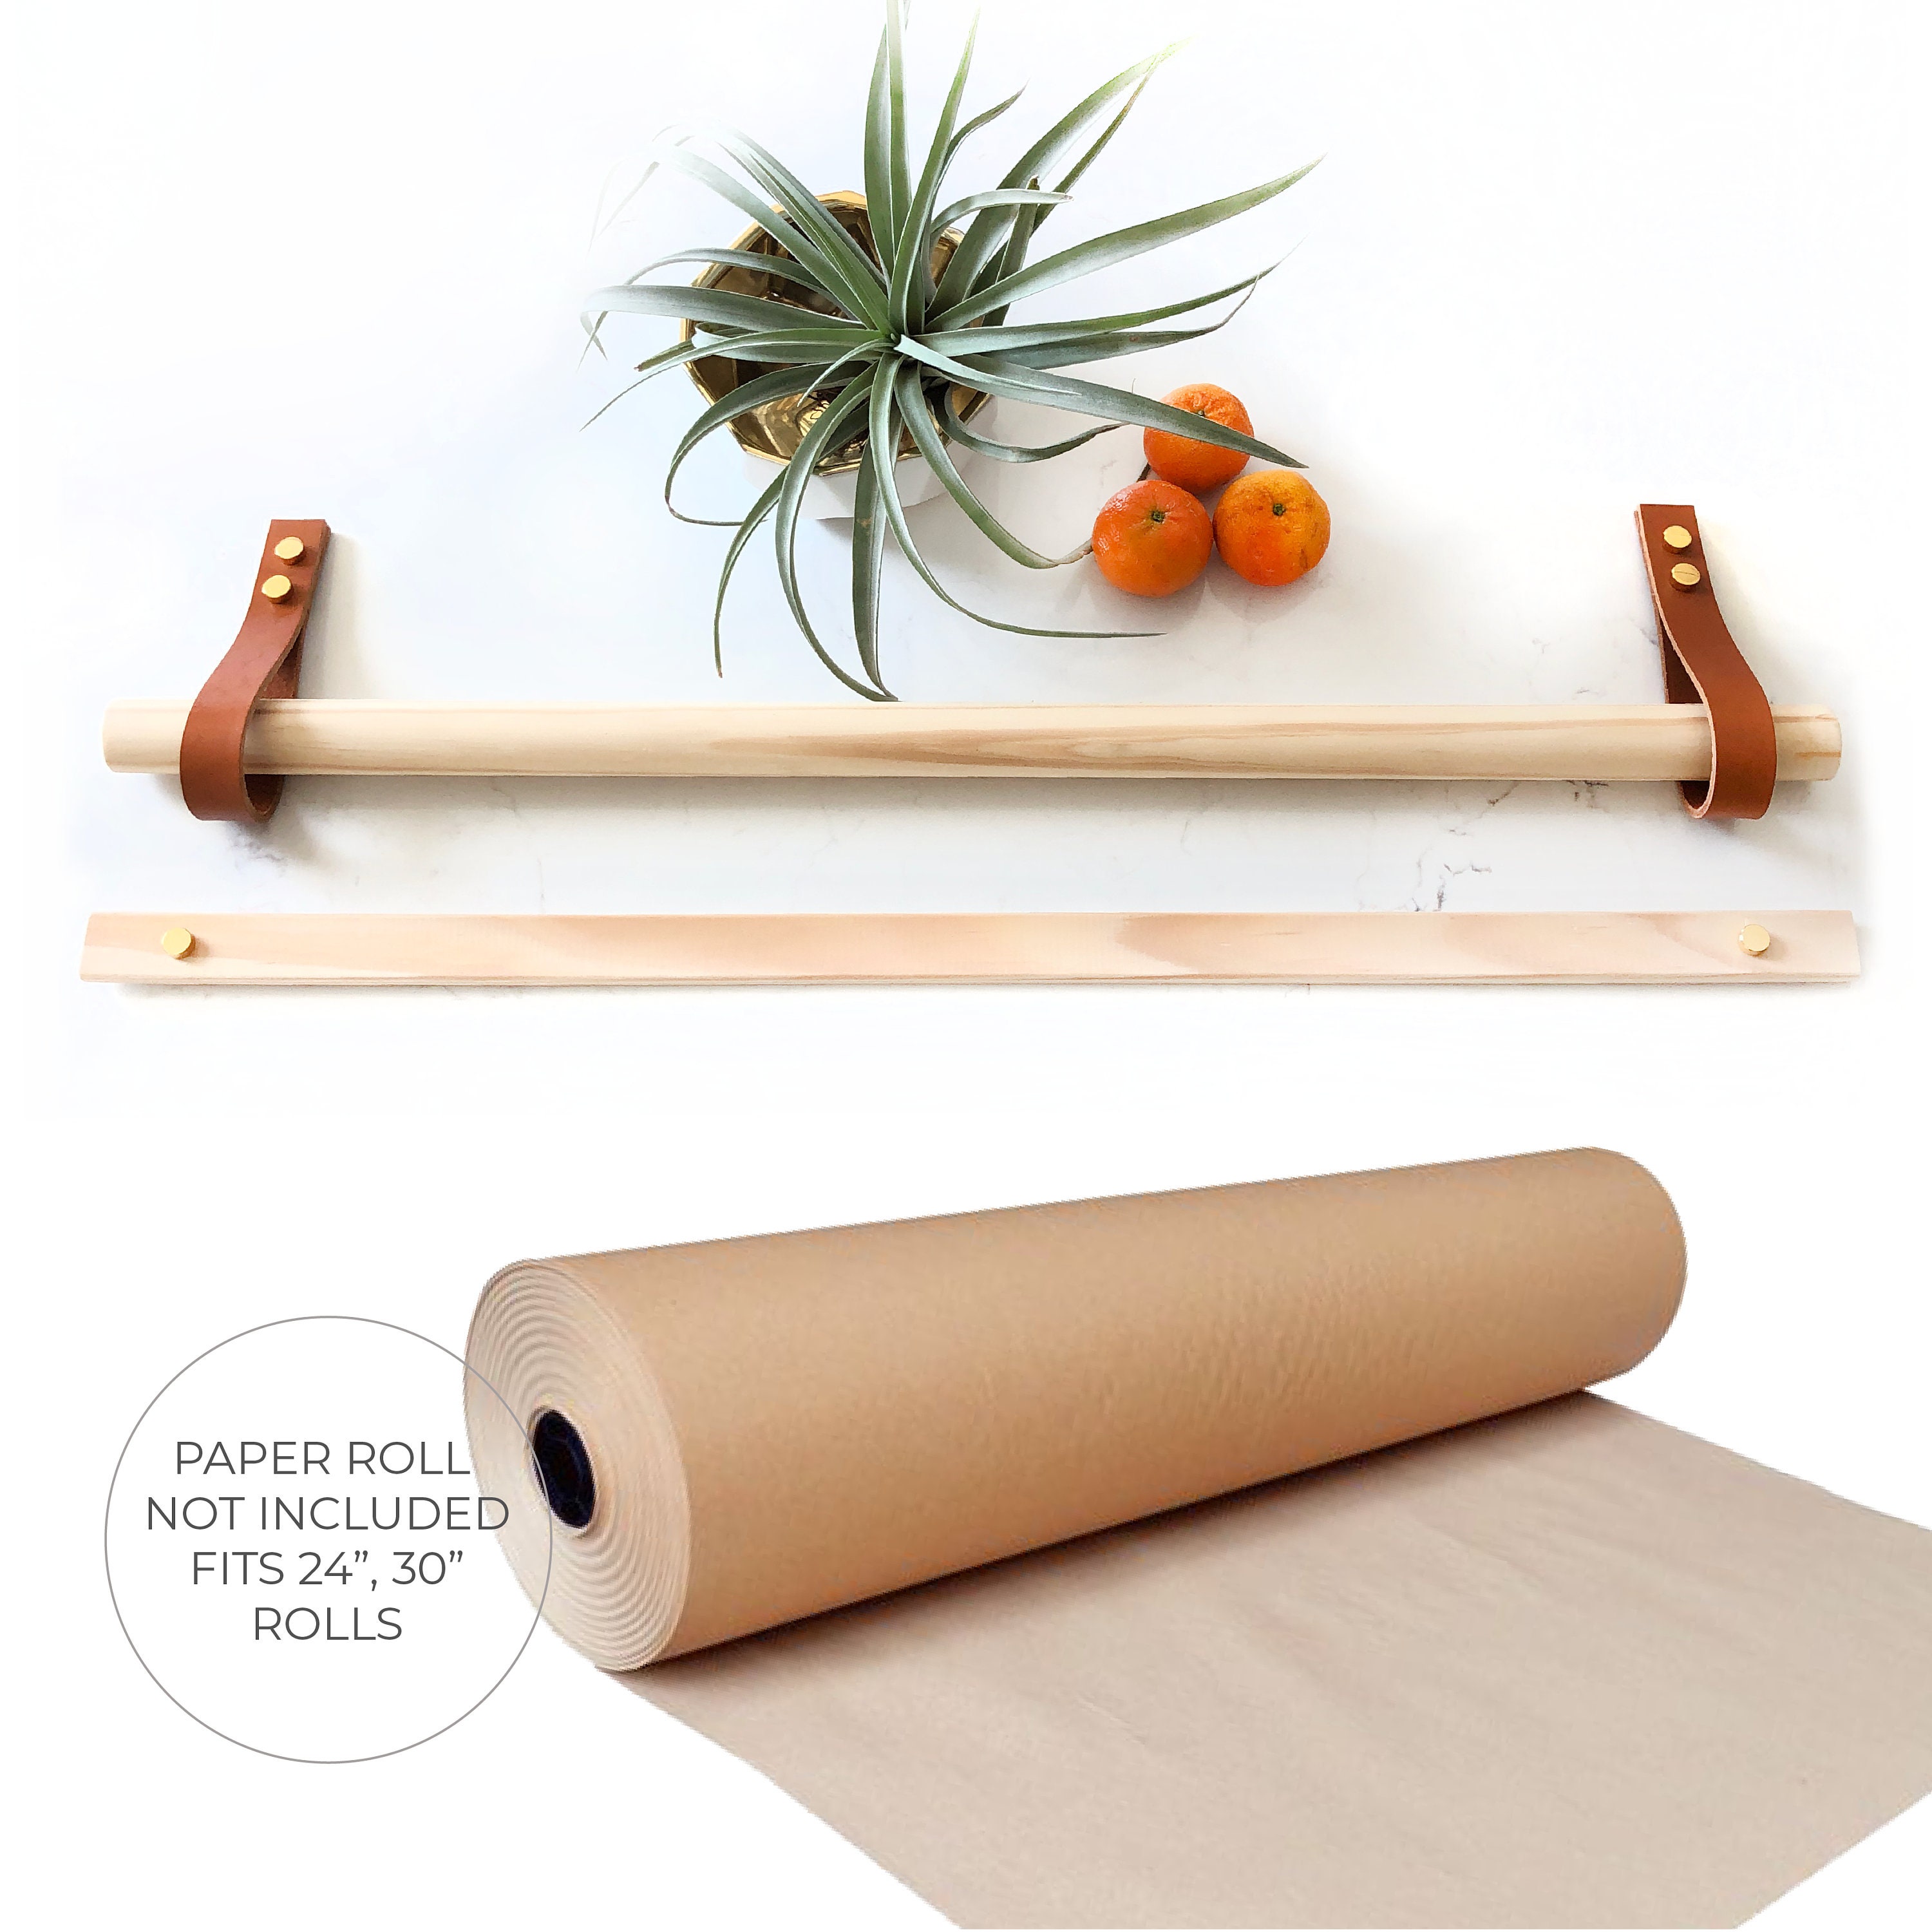 Easy DIY for hanging a roll of easel paper on the wall